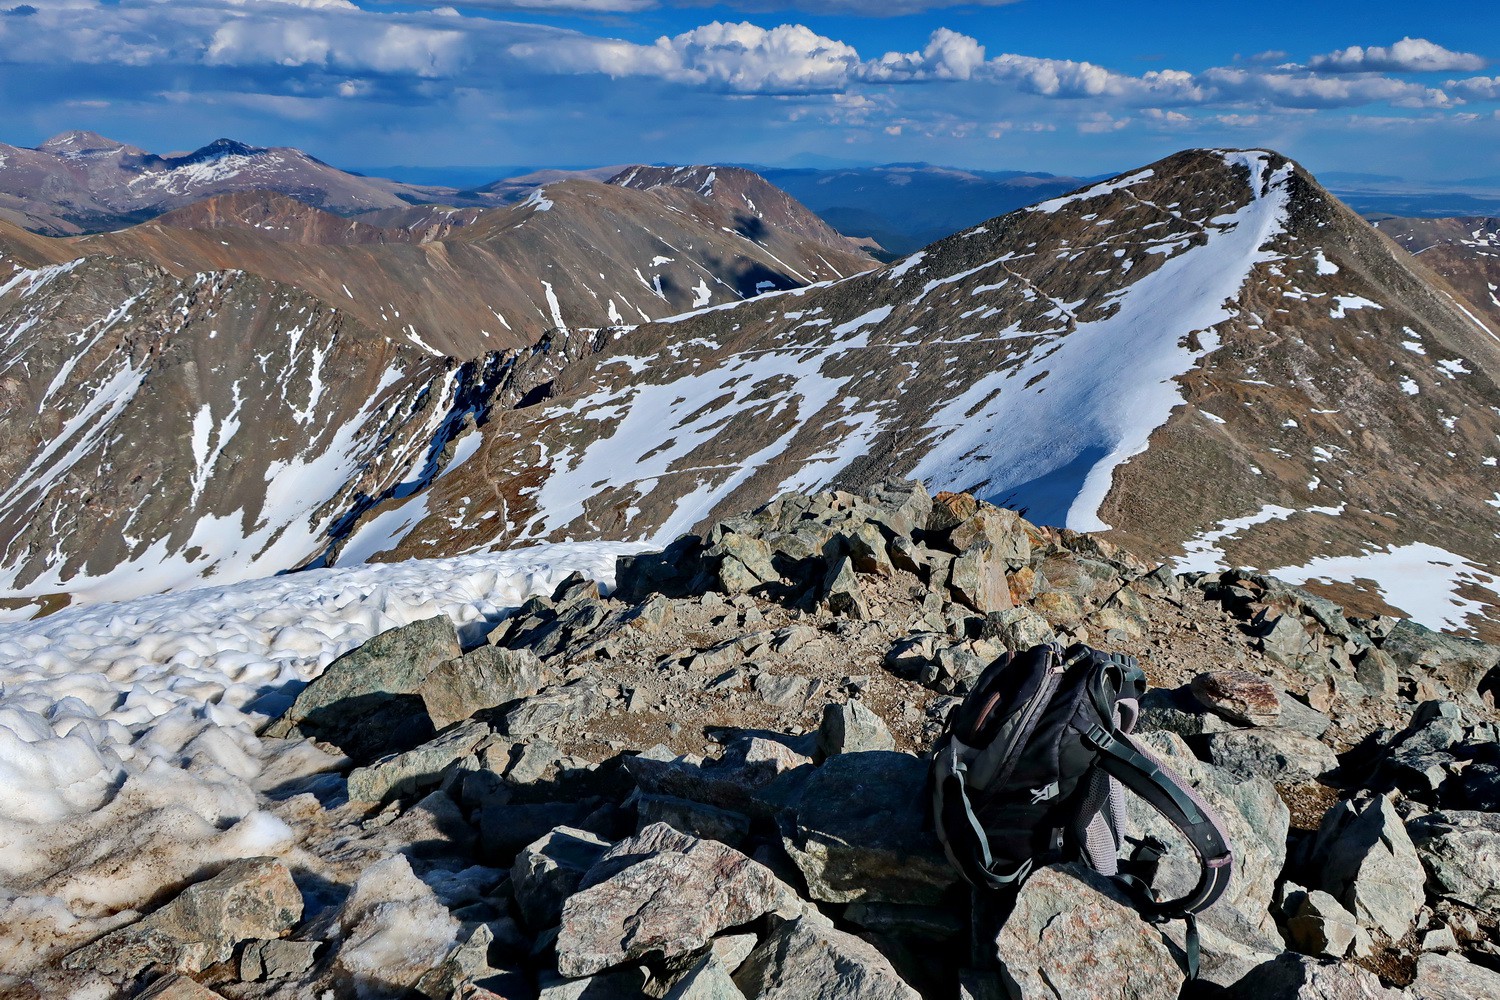 Summit of 4351 meters high Torreys Peak with Greys Peak on the the right. Both are the tallest mountains of the Front Range.